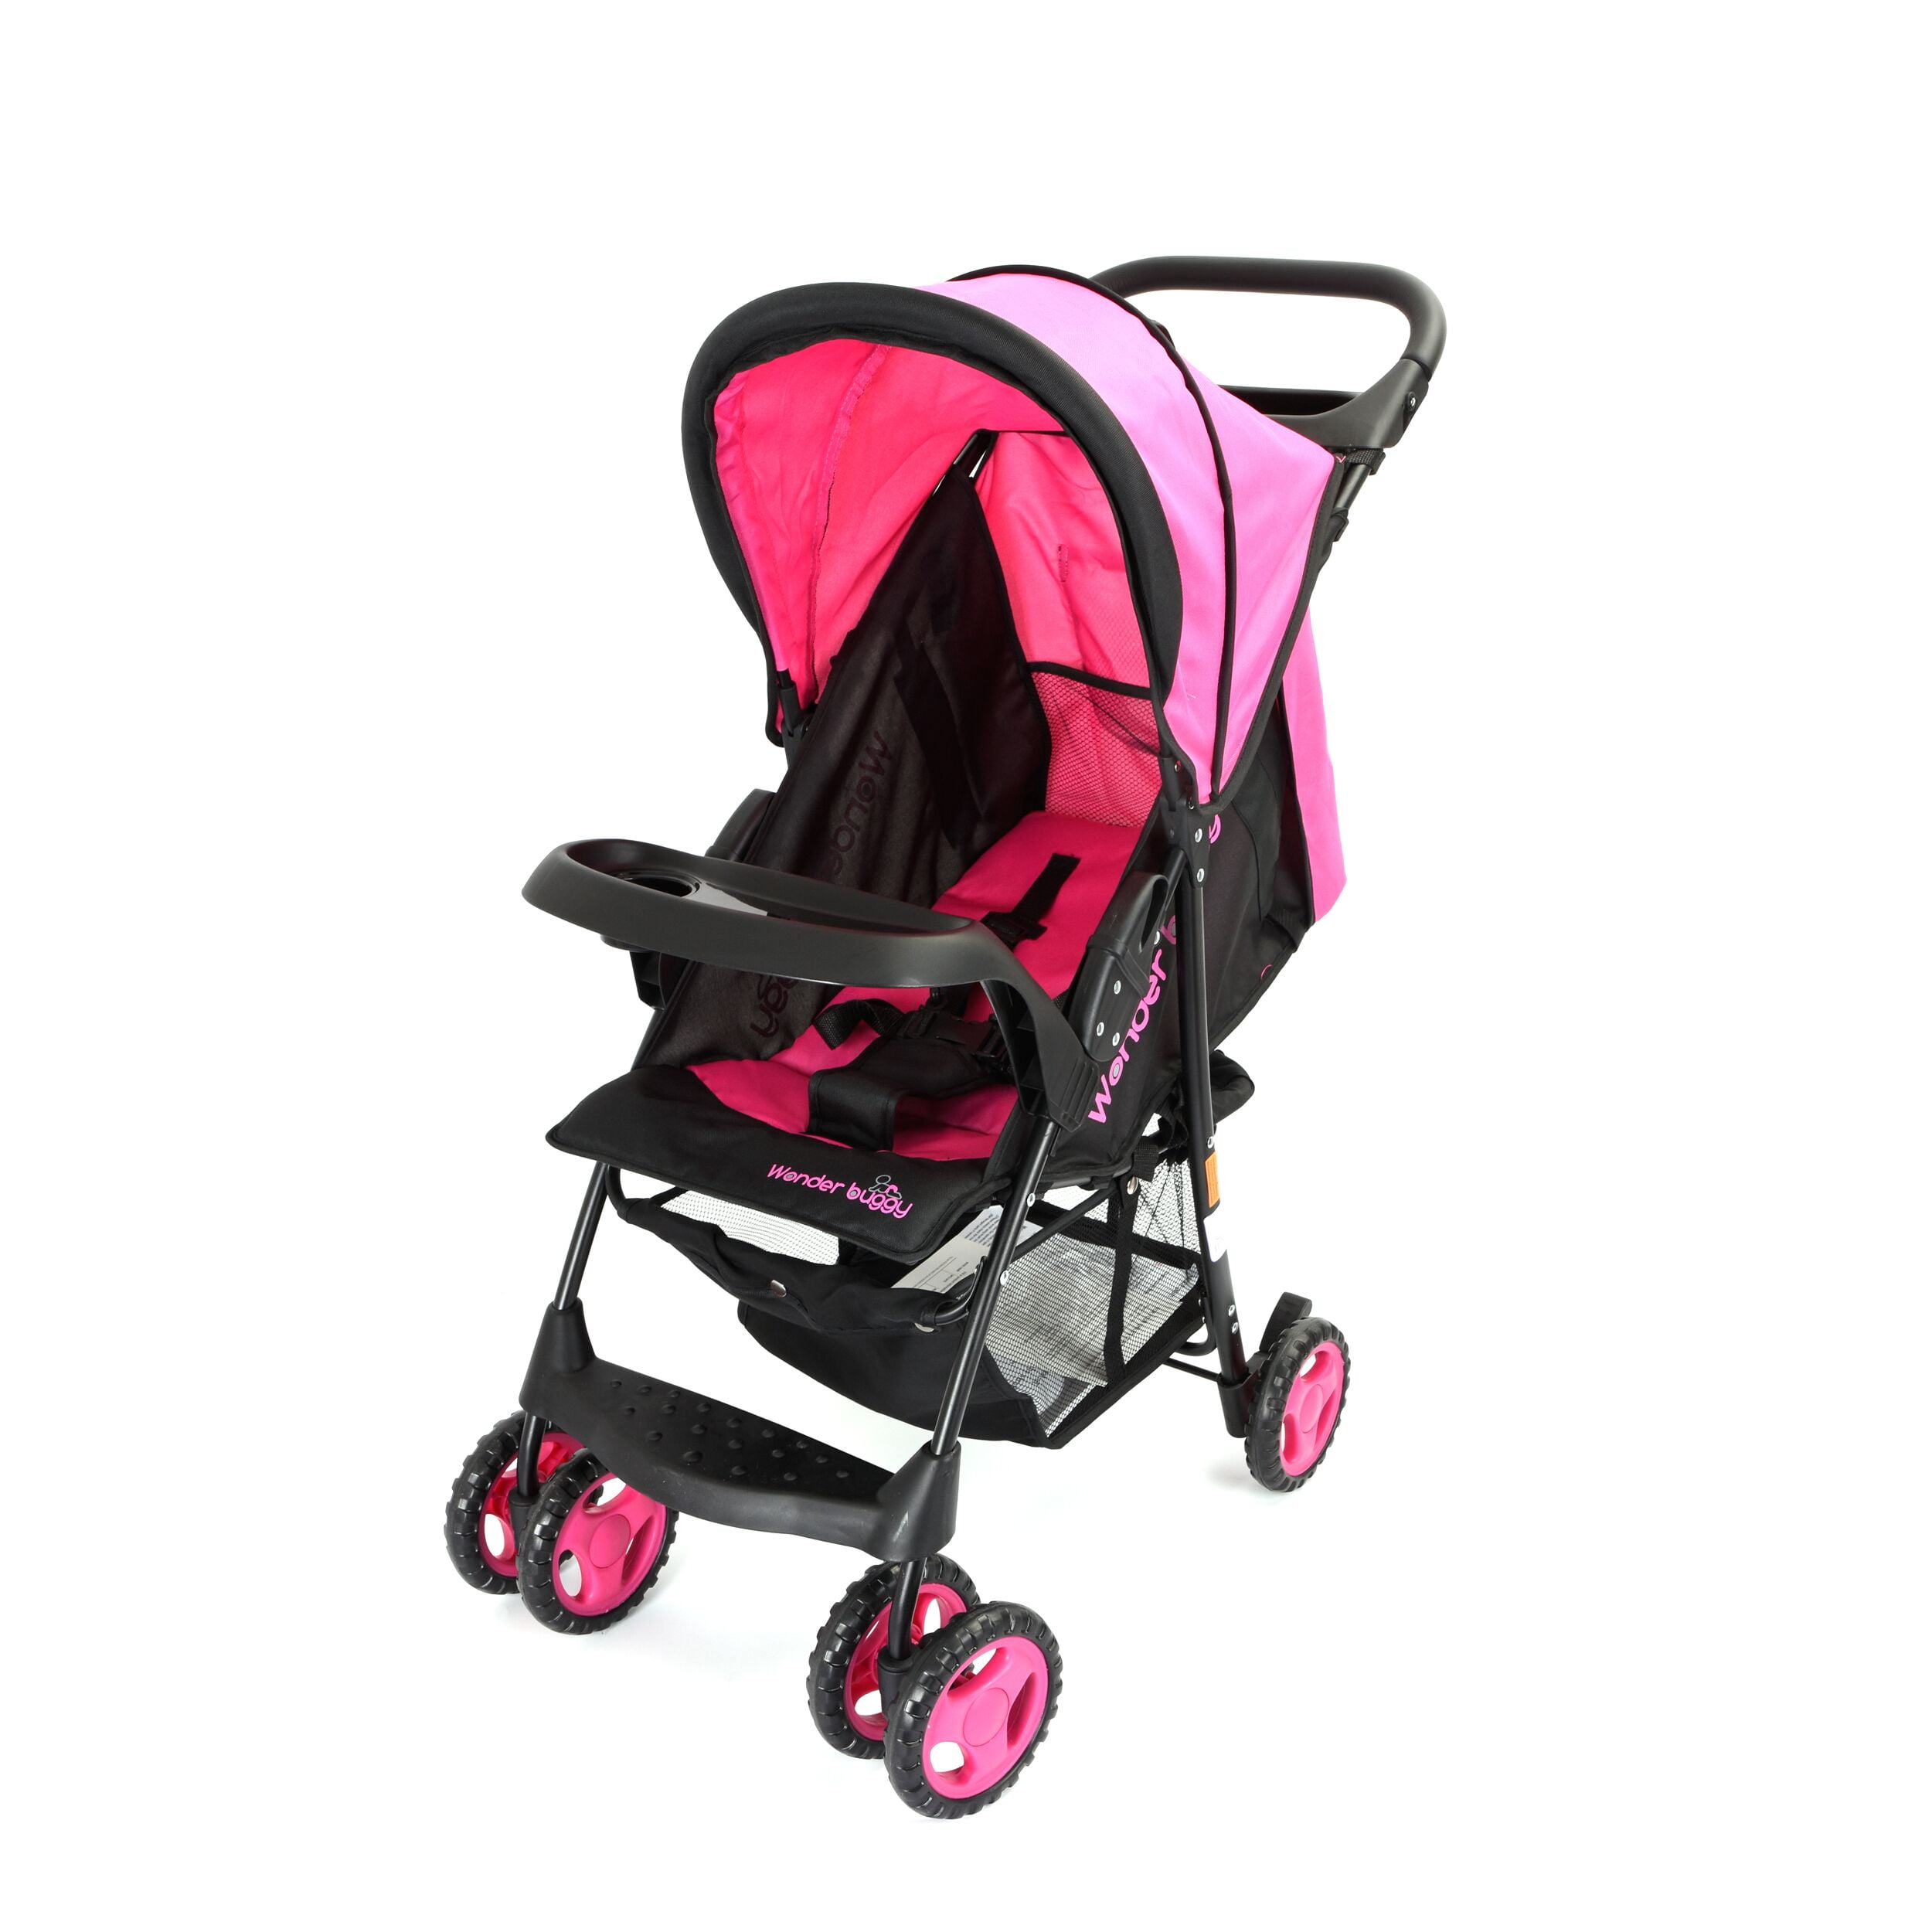 Pink Buy Wonder Products Roadmate Multi Position Compact Stroller with Canopy,Basket & Toy Tray